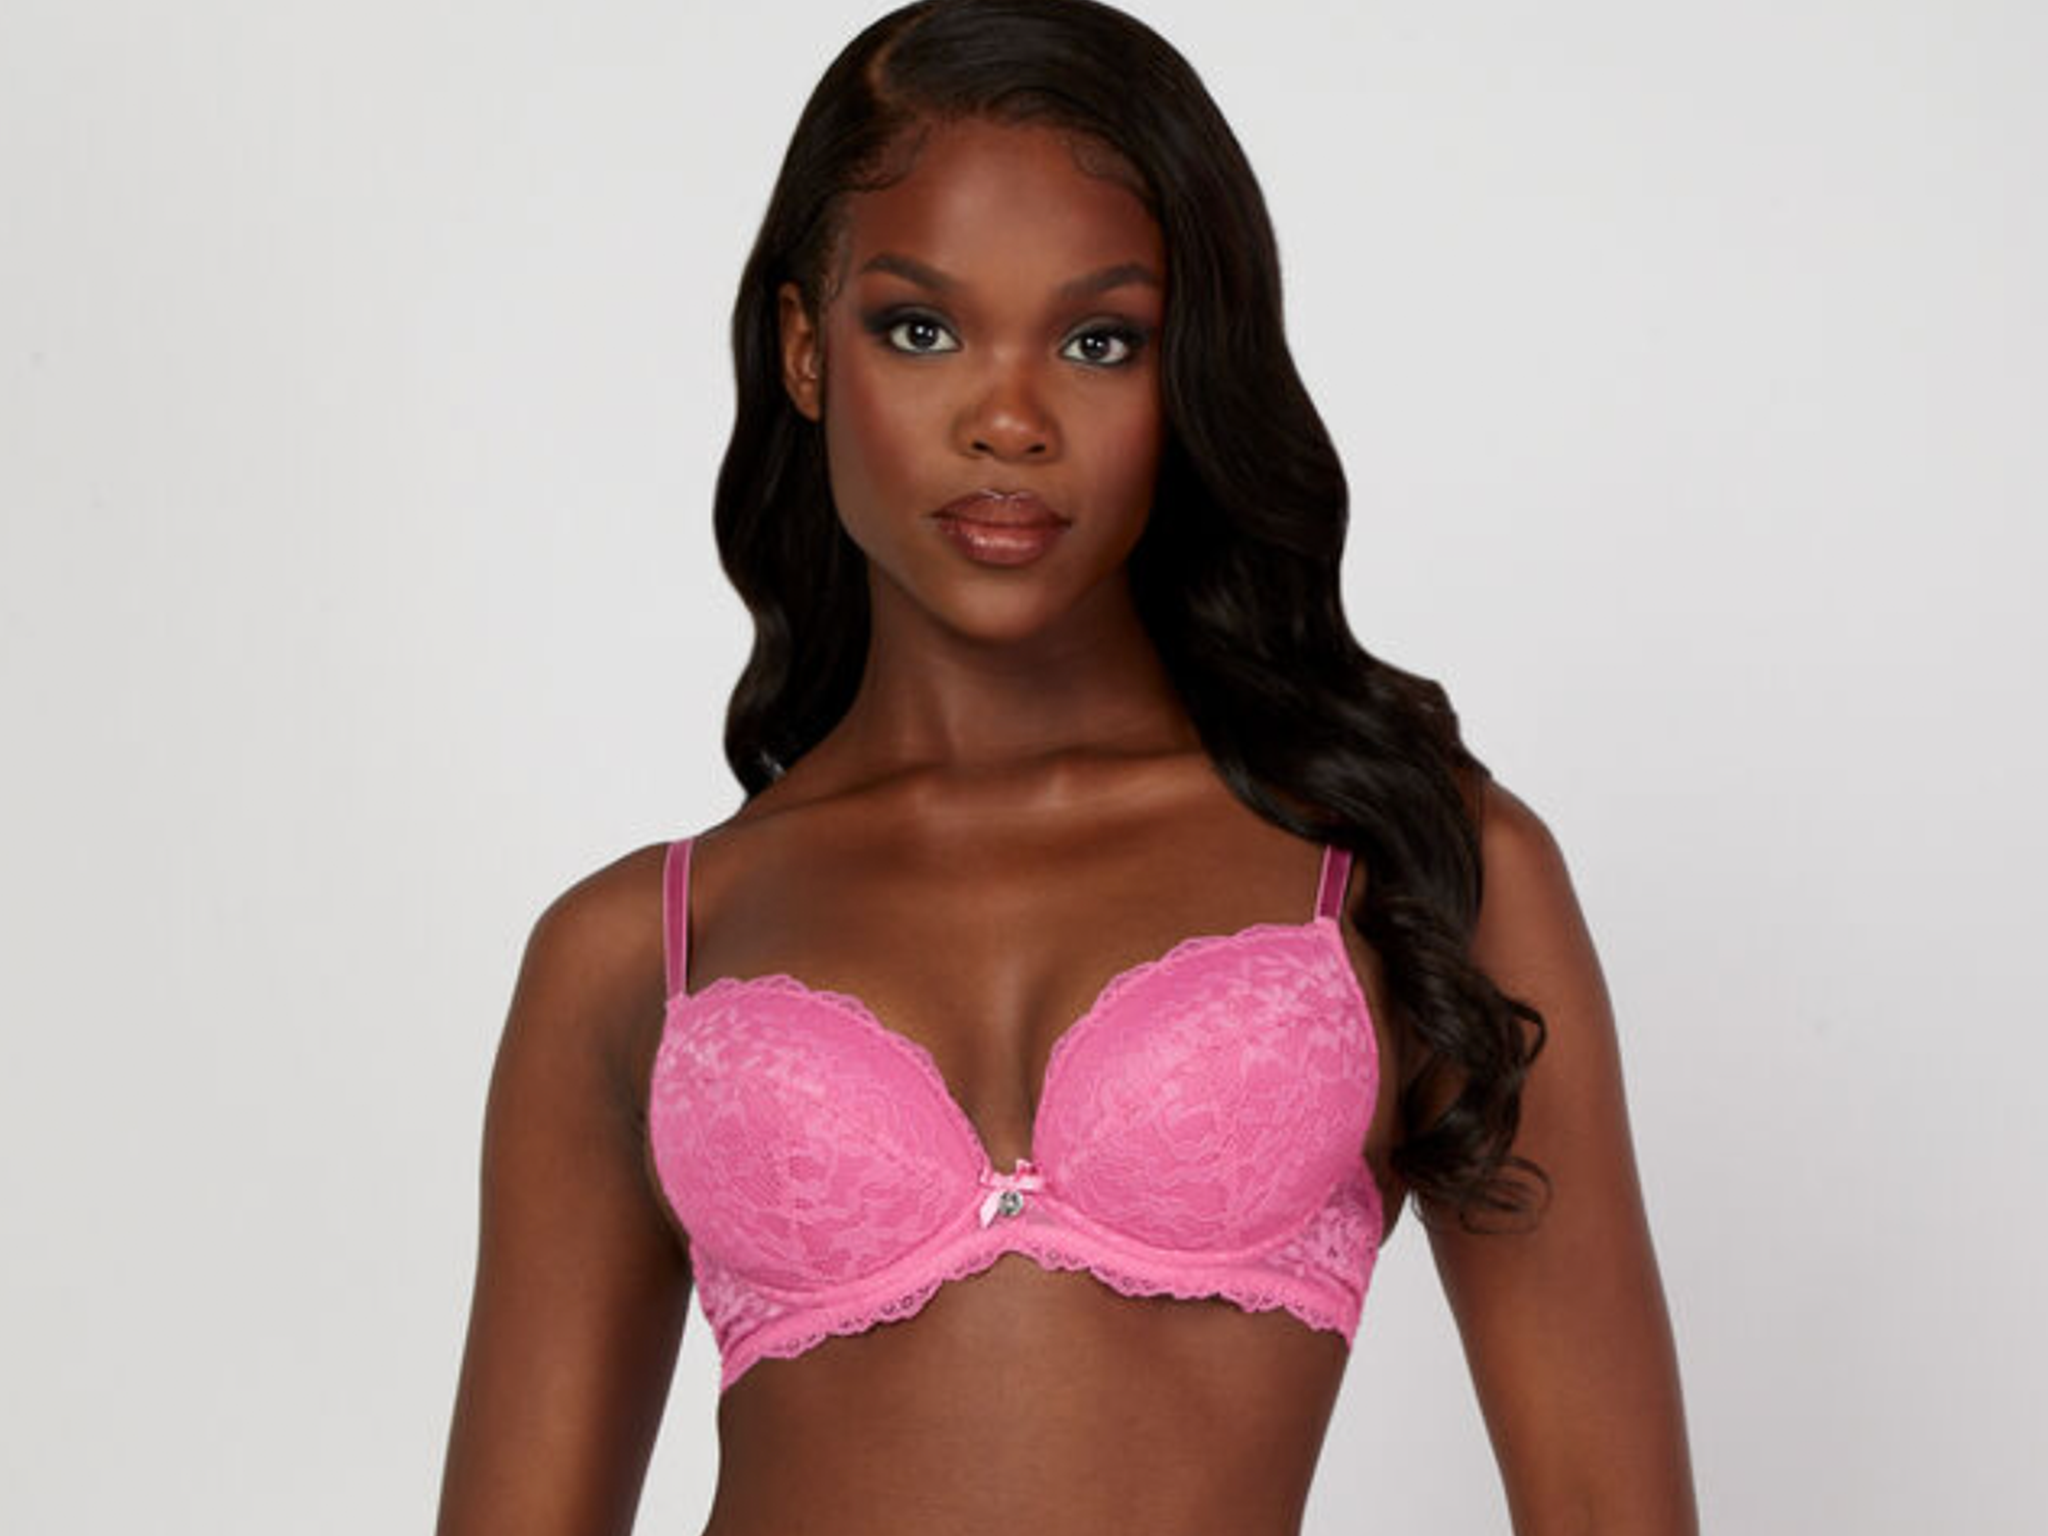 Boux Avenue Mollie bra review: We put the bra with over 1,800 five